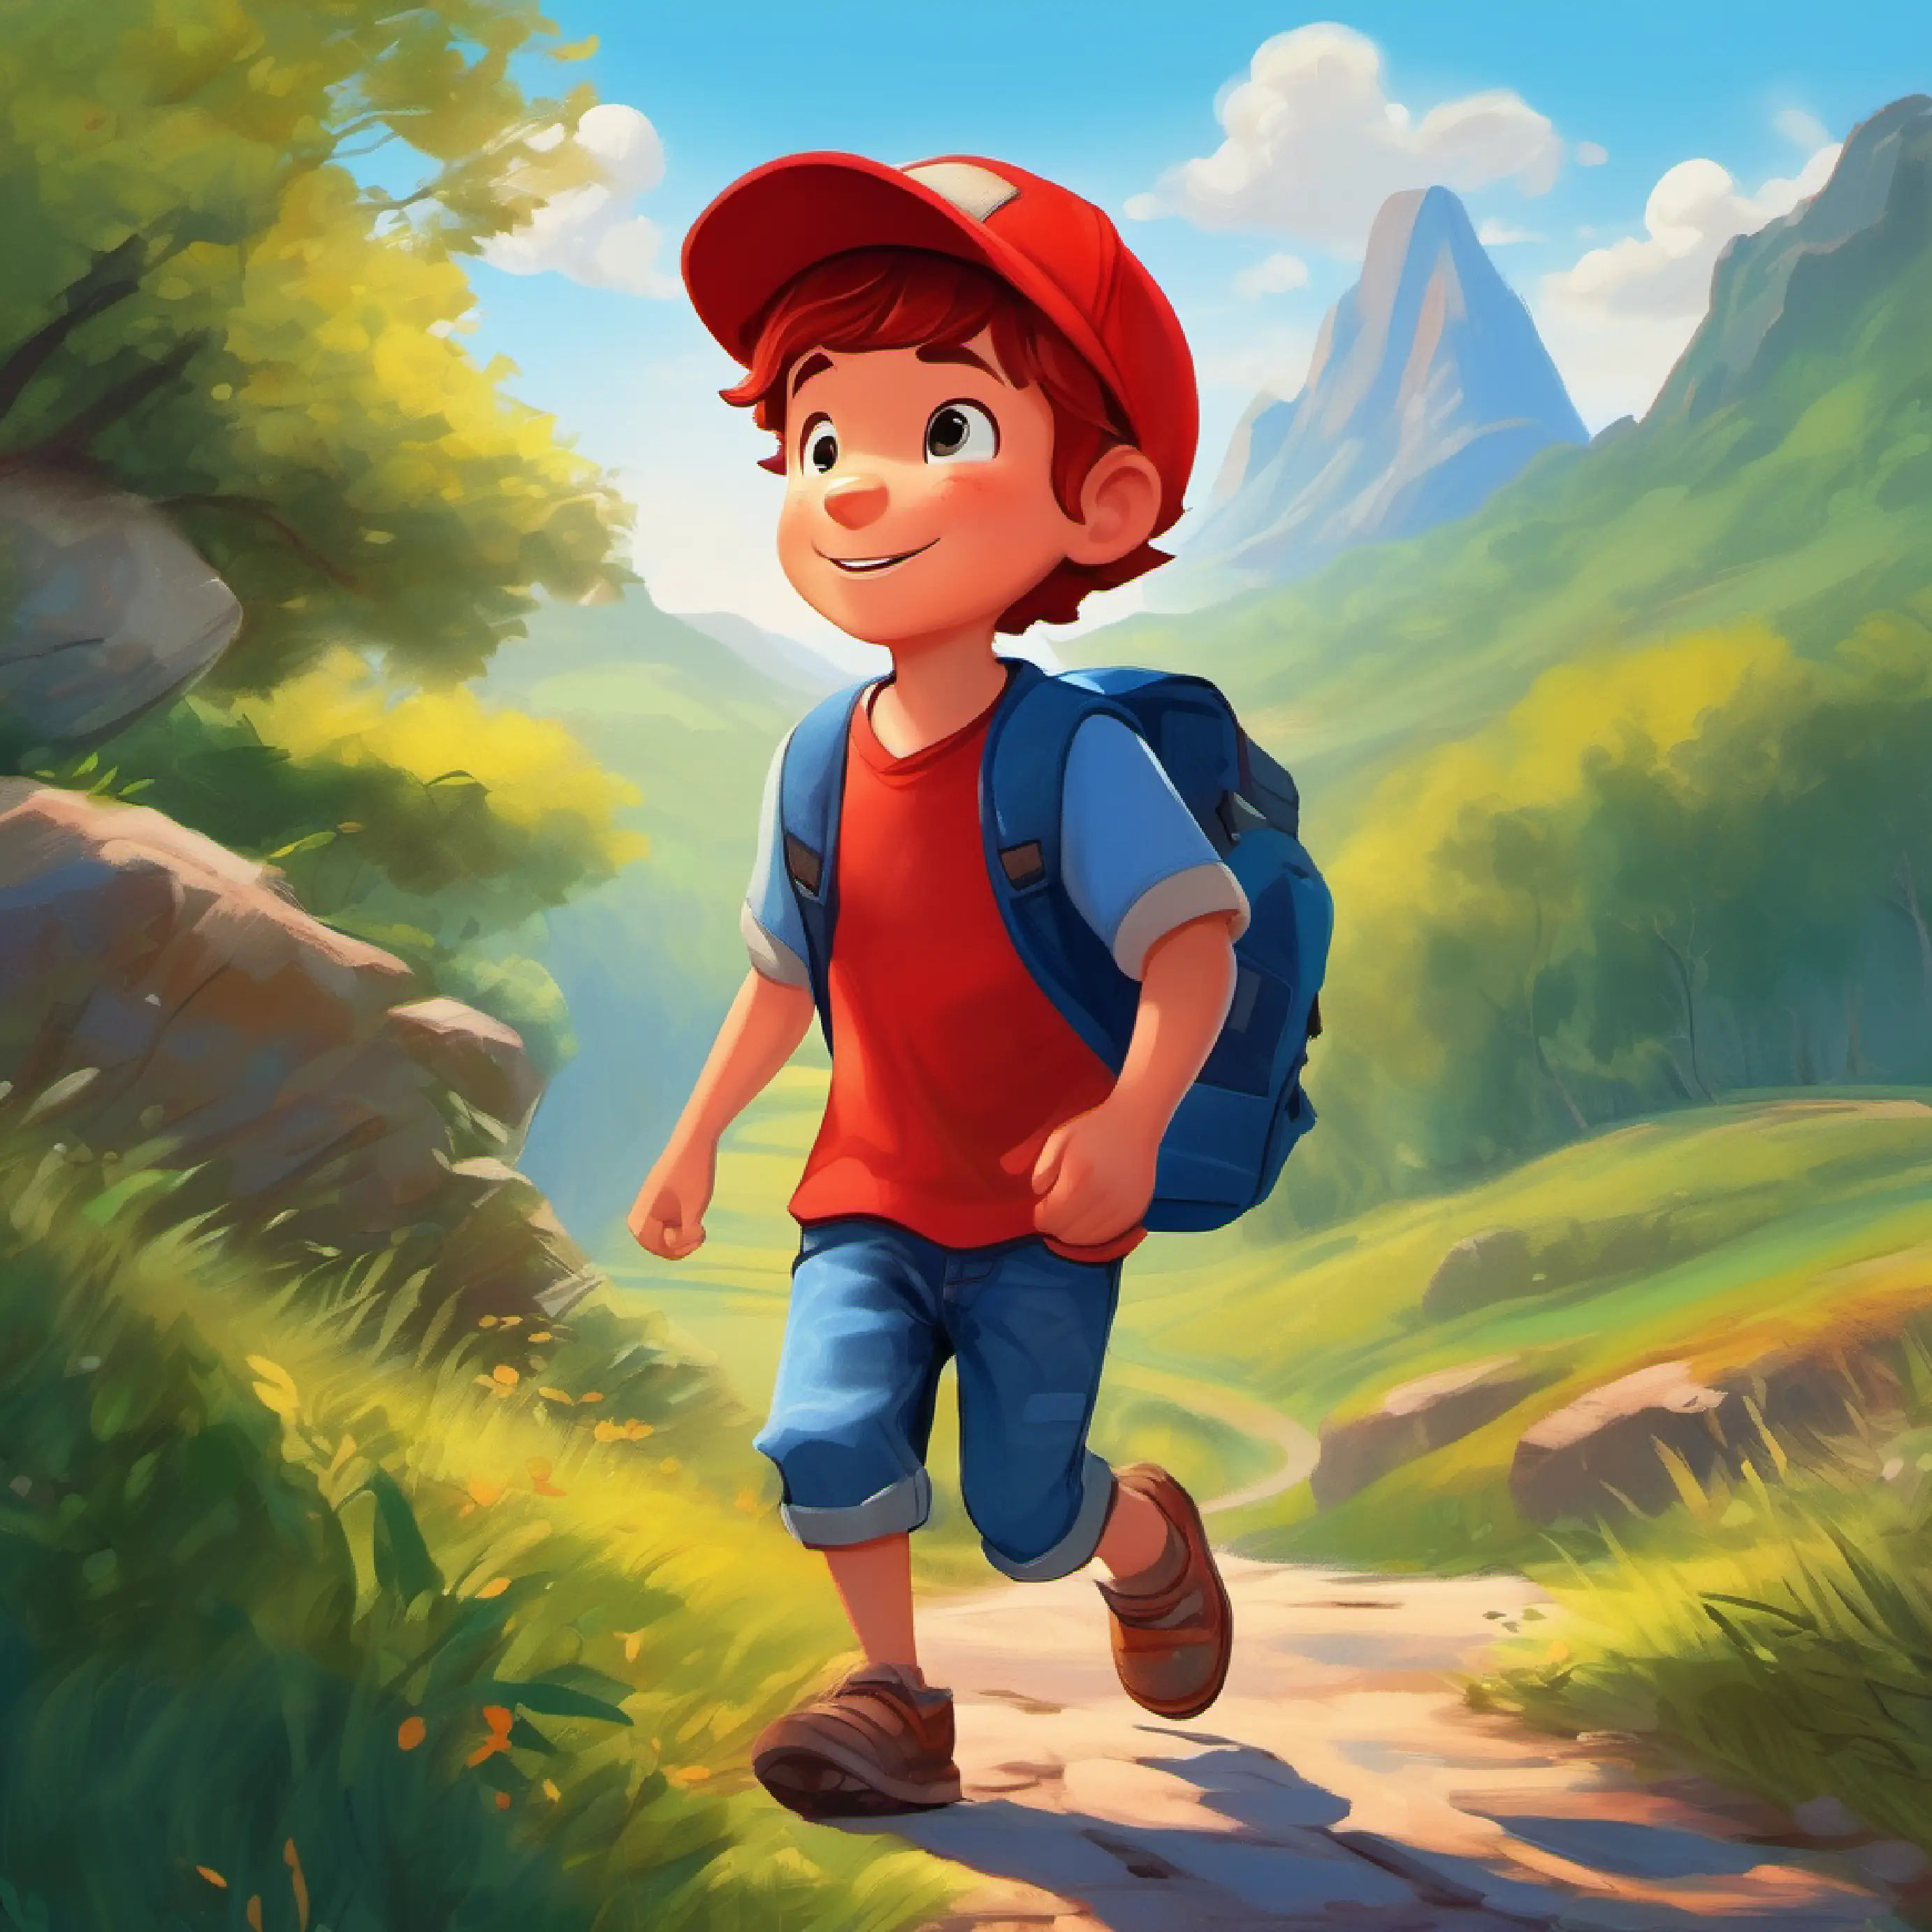 Brave boy, red cap, loves to explore, wears blue jeans sets out for an adventure, sunny morning, bright red cap